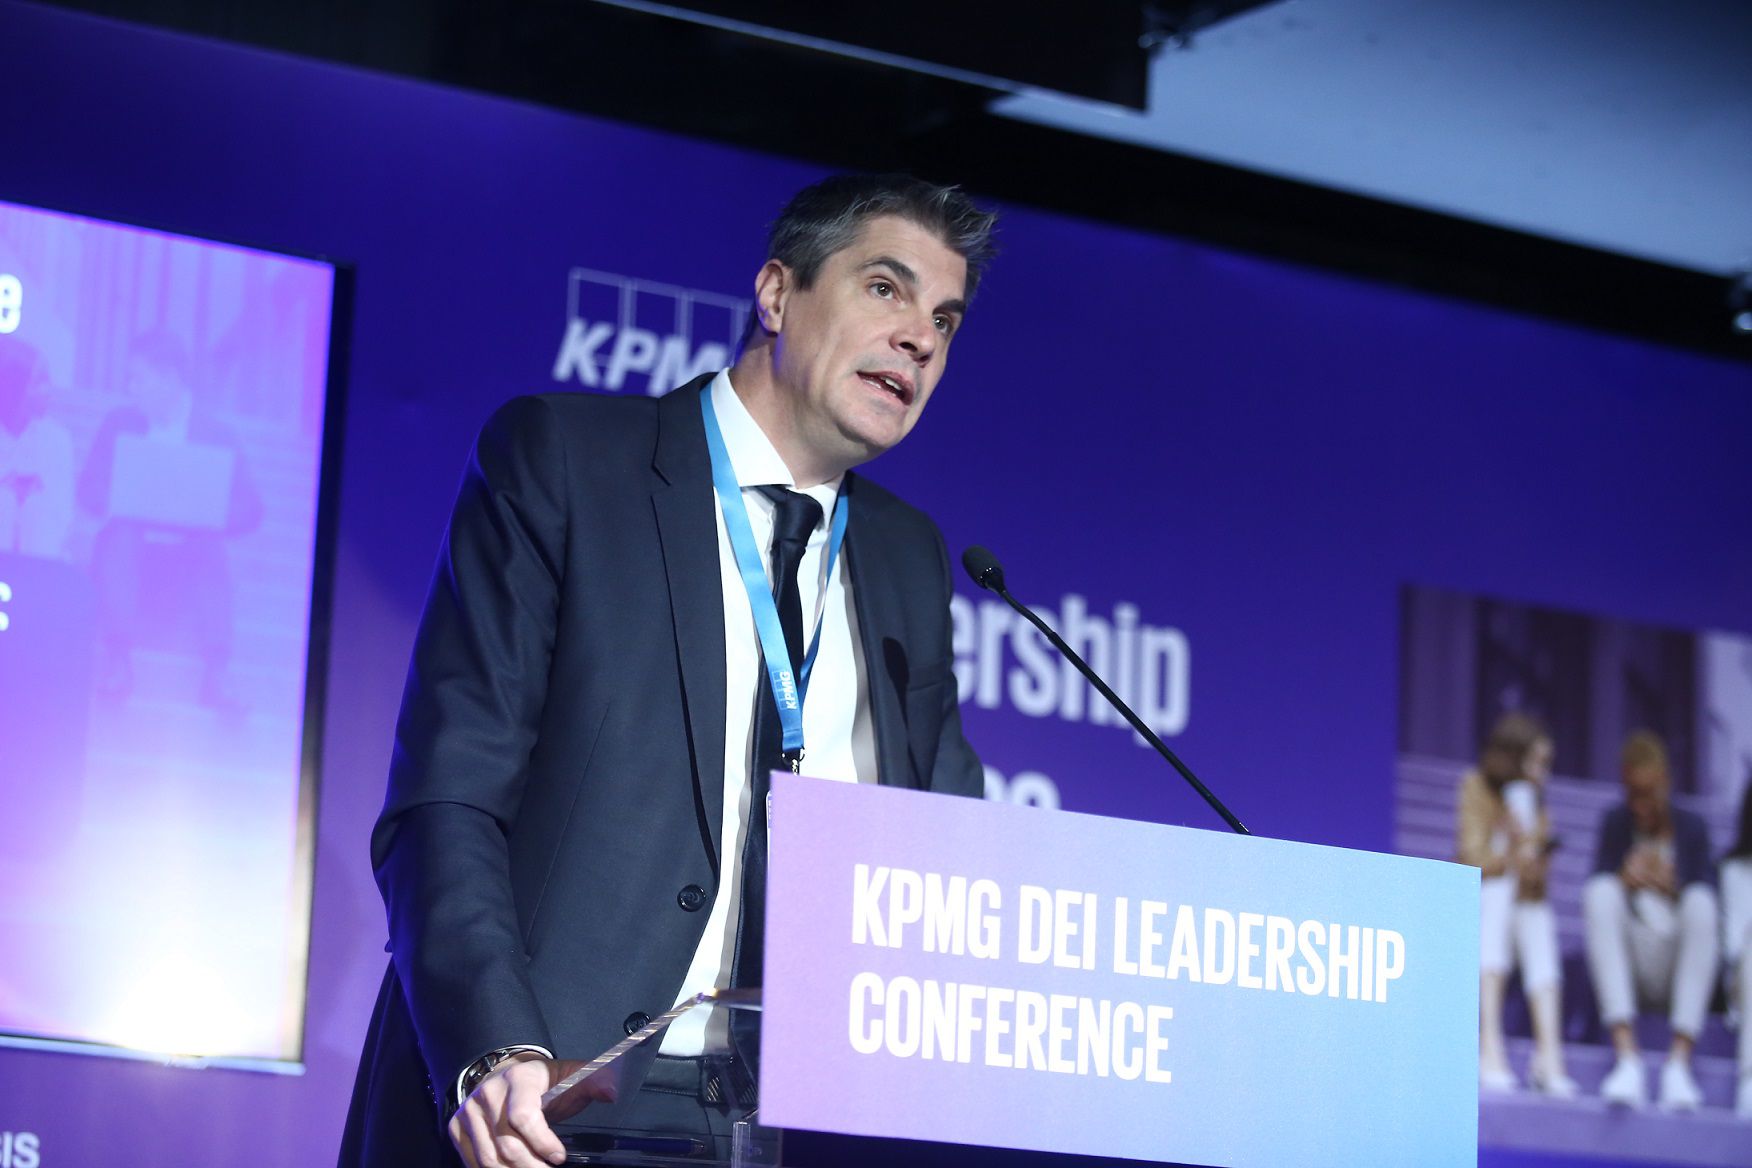 Alexandros Aggelopoulos speaking at KPMG DEI Conference